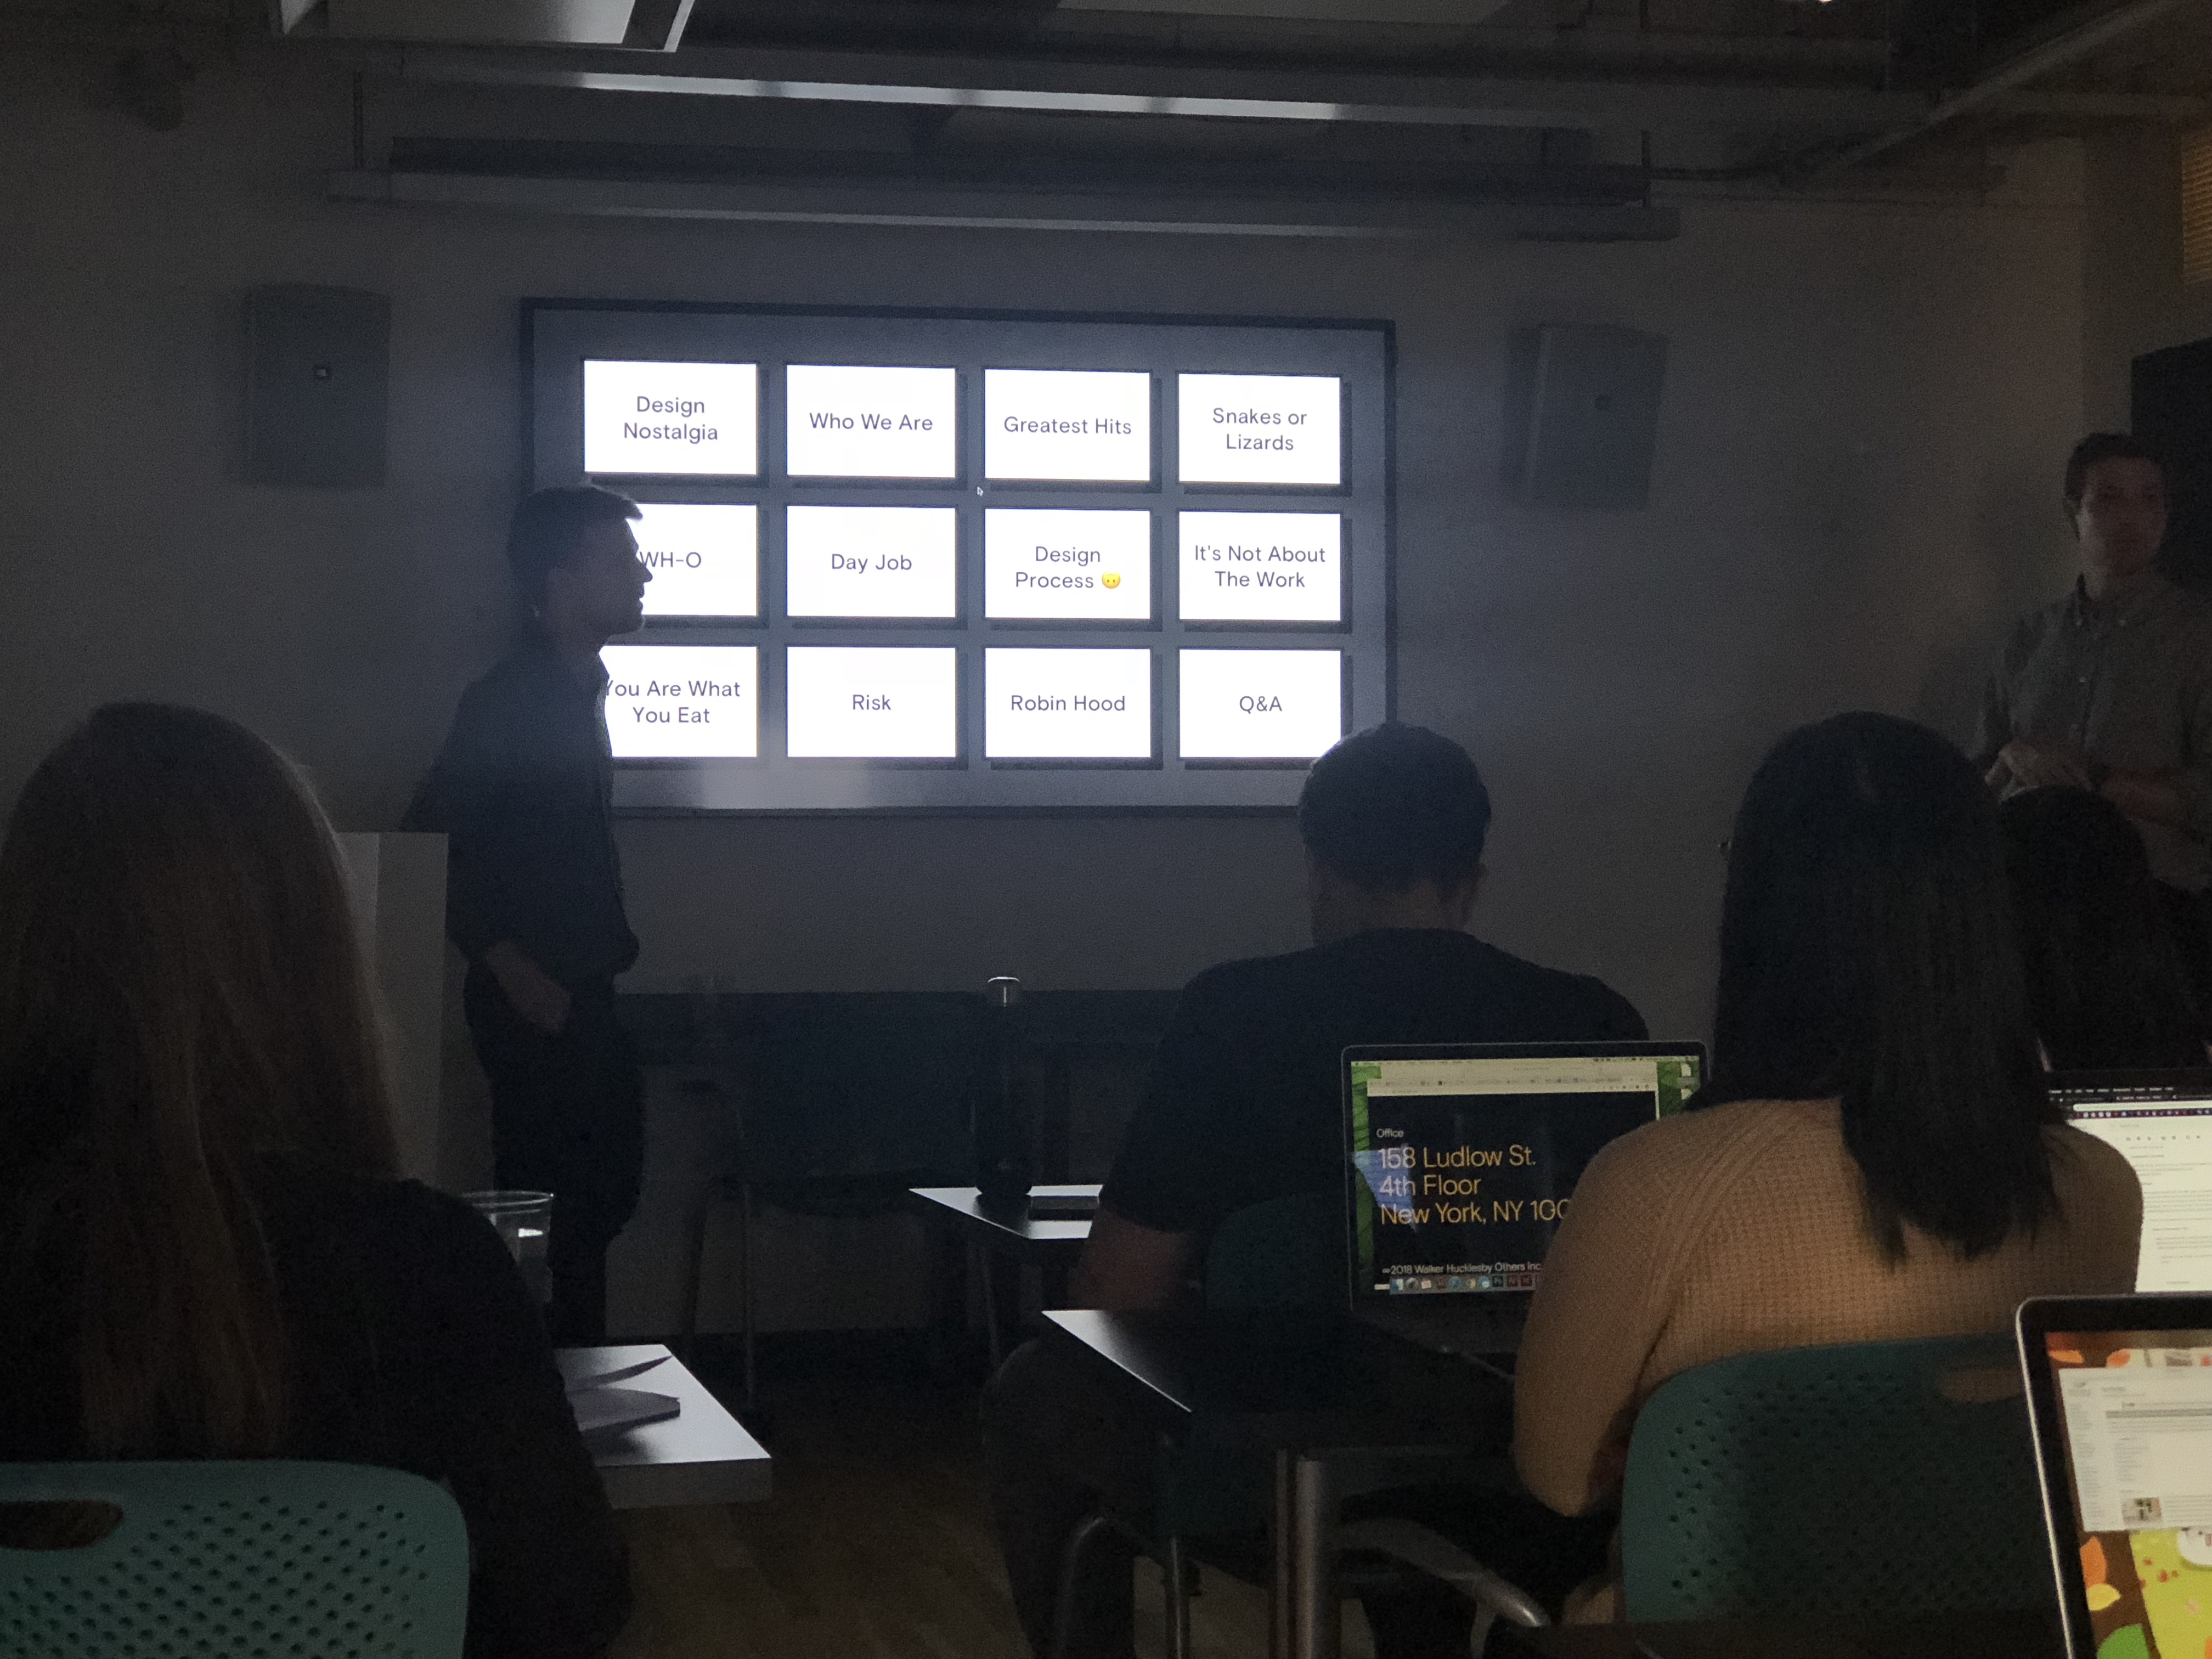 A photo of some students in a classroom listening to a lecture, while a teacher shows them a list of tiles with text on a tv screen.